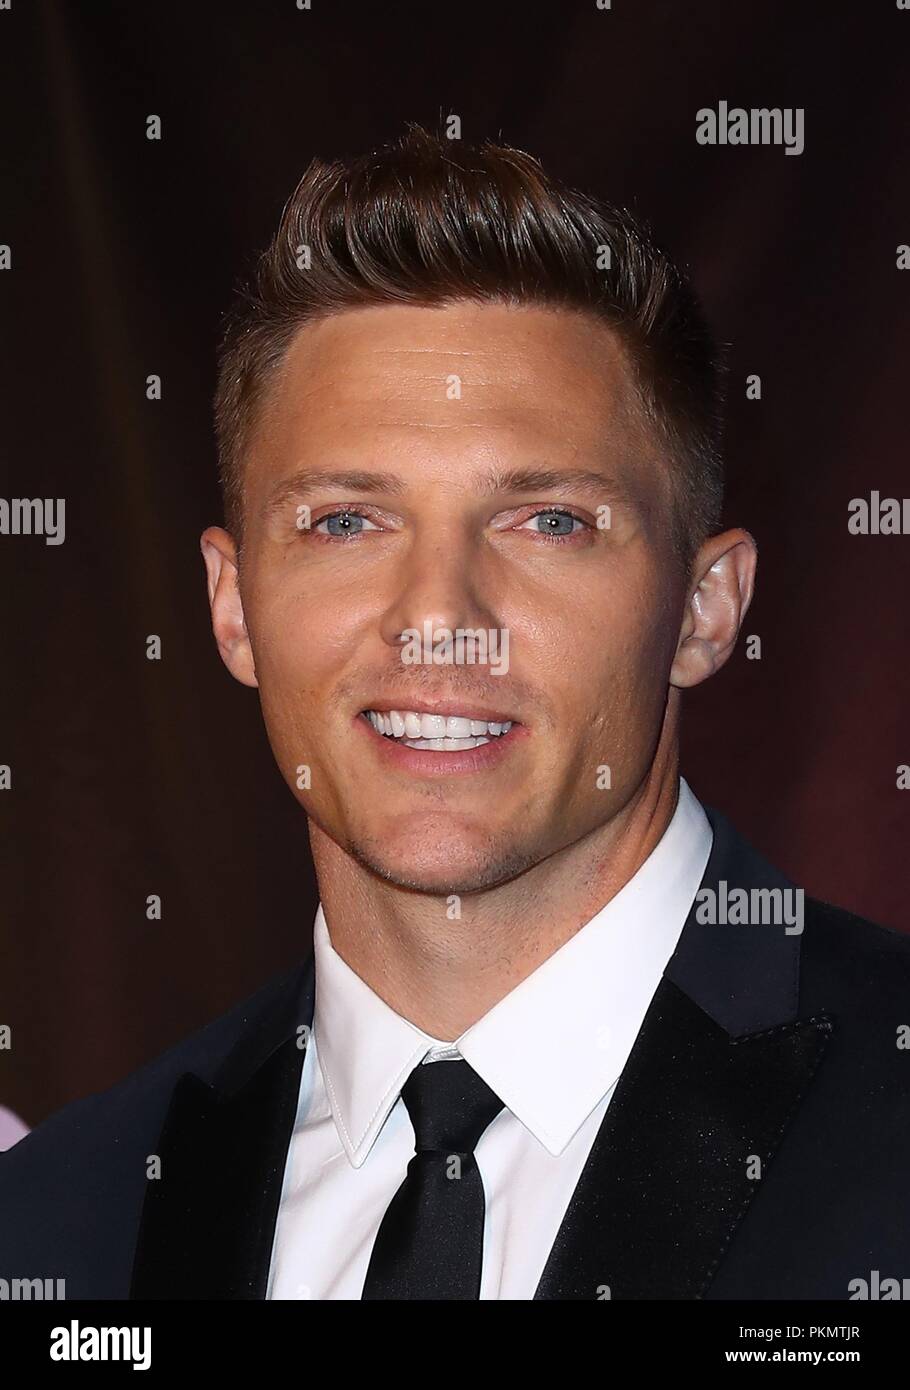 Steve Cook at arrivals for Freestyle Releasing BIGGER World Premiere, Orleans Arena, Las Vegas, NV September 13, 2018. Photo By: MORA/Everett Collection Stock Photo